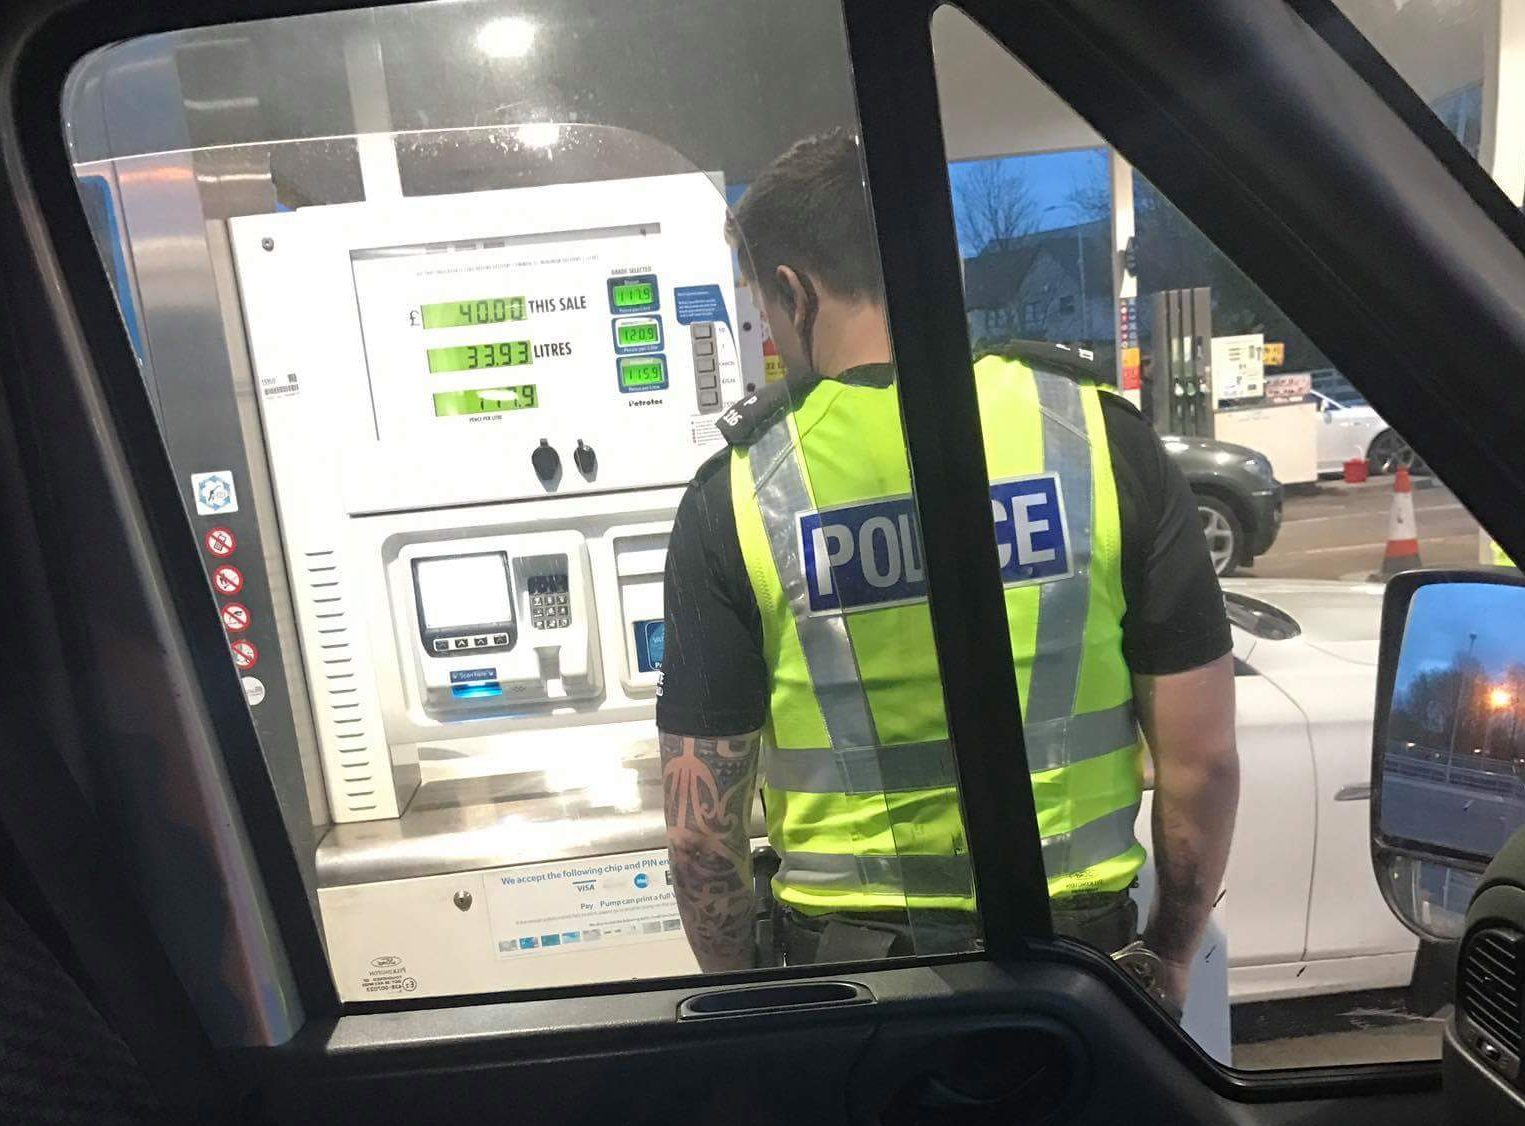 Police inspecting the pay at pump machine in Dunfermline.